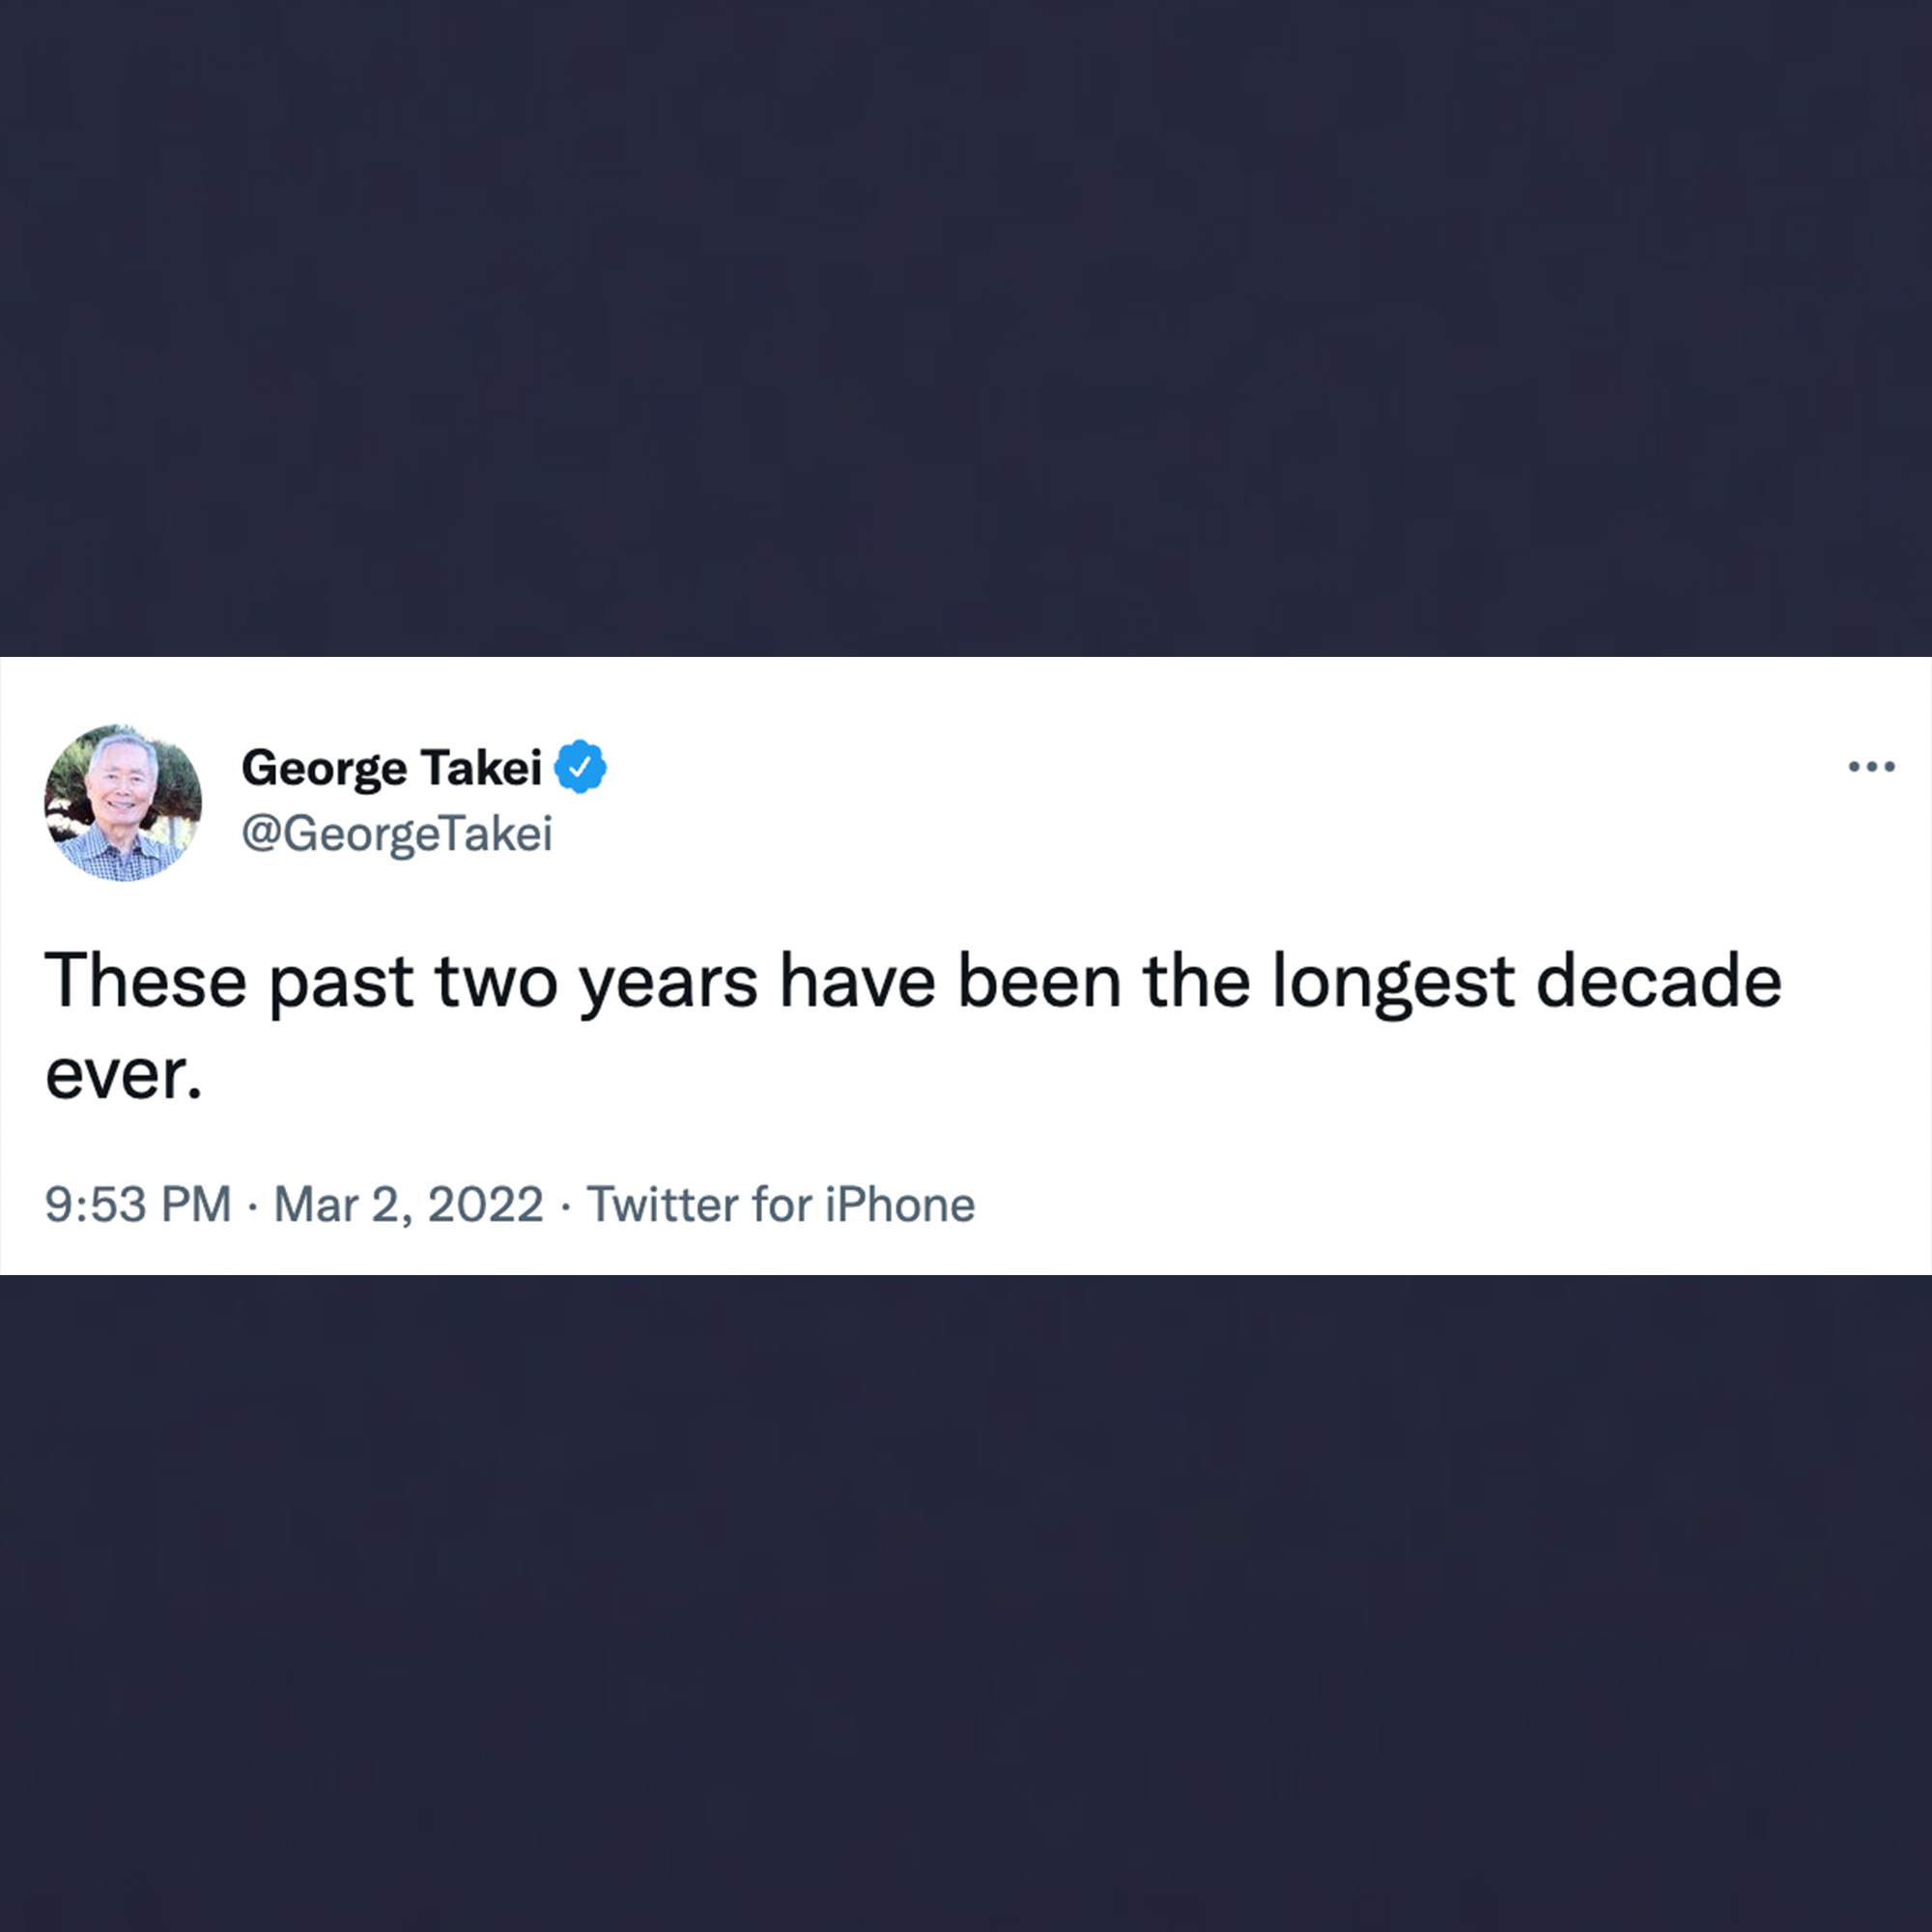 funny tweets - screenshot - George Takei These past two years have been the longest decade ever. Twitter for iPhone